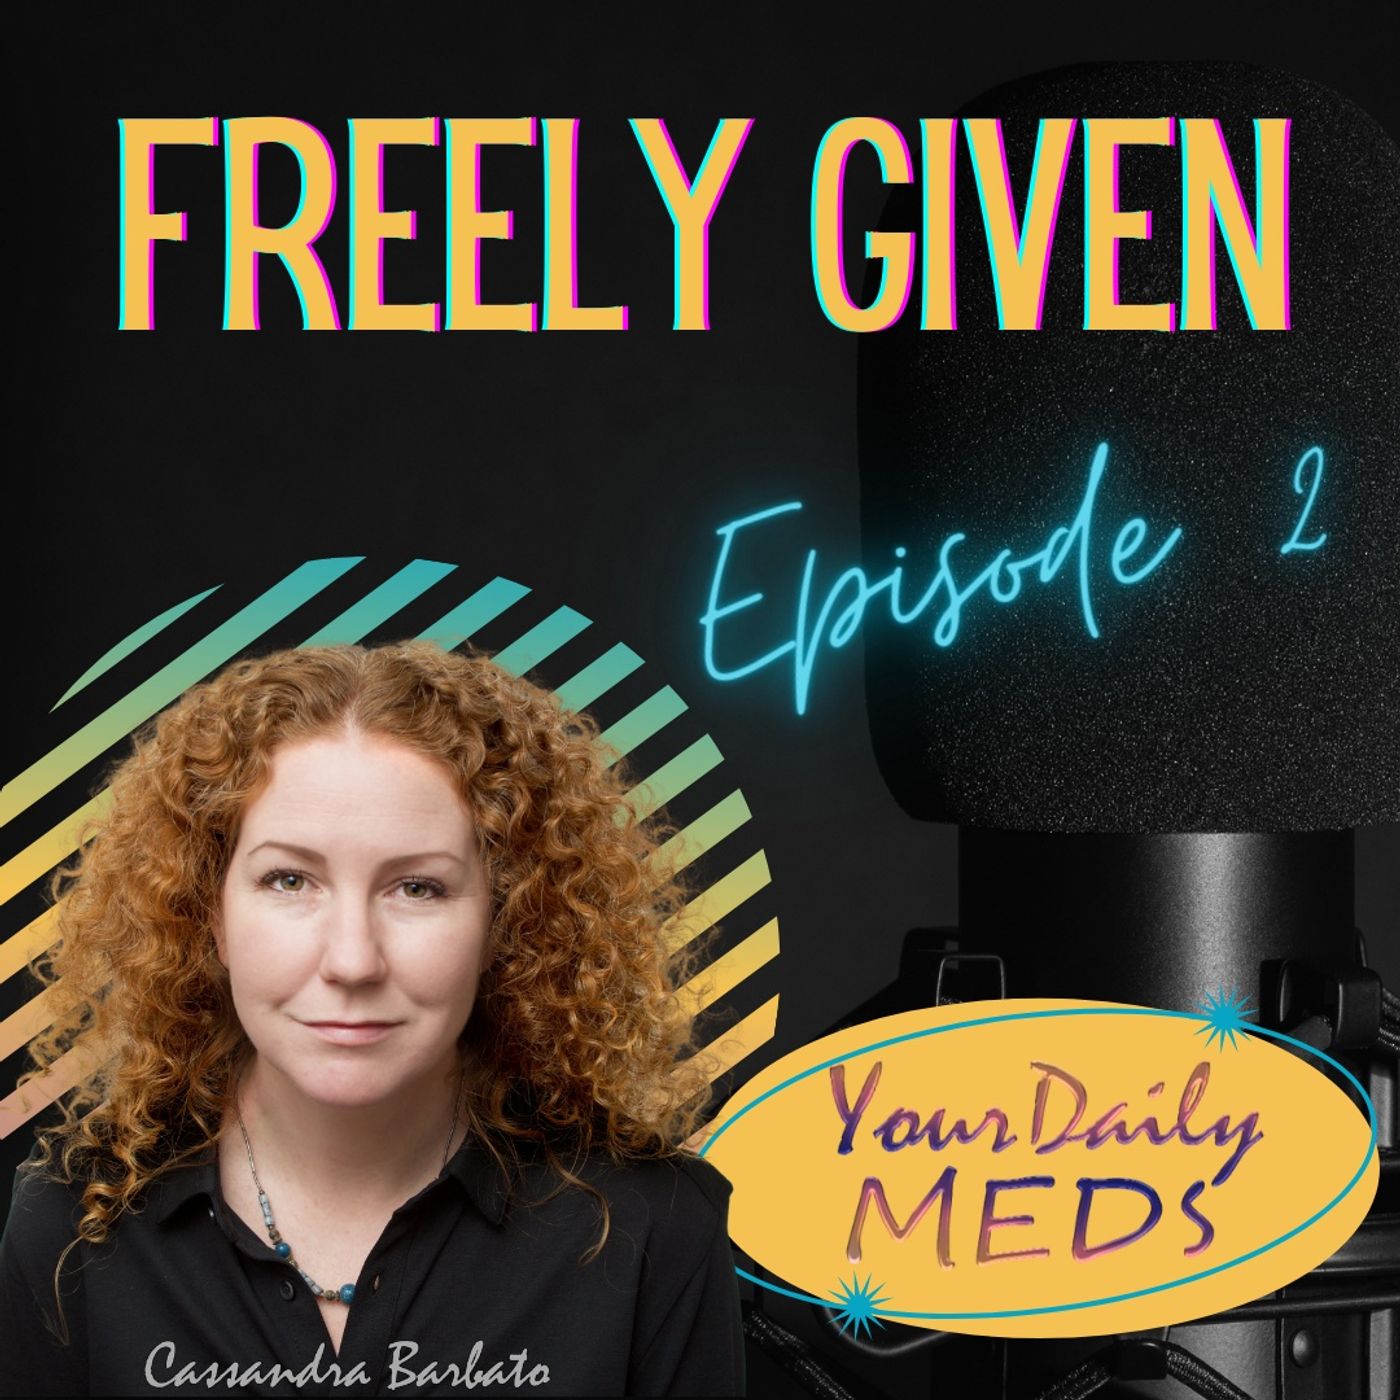 Episode 2 - Freely Given